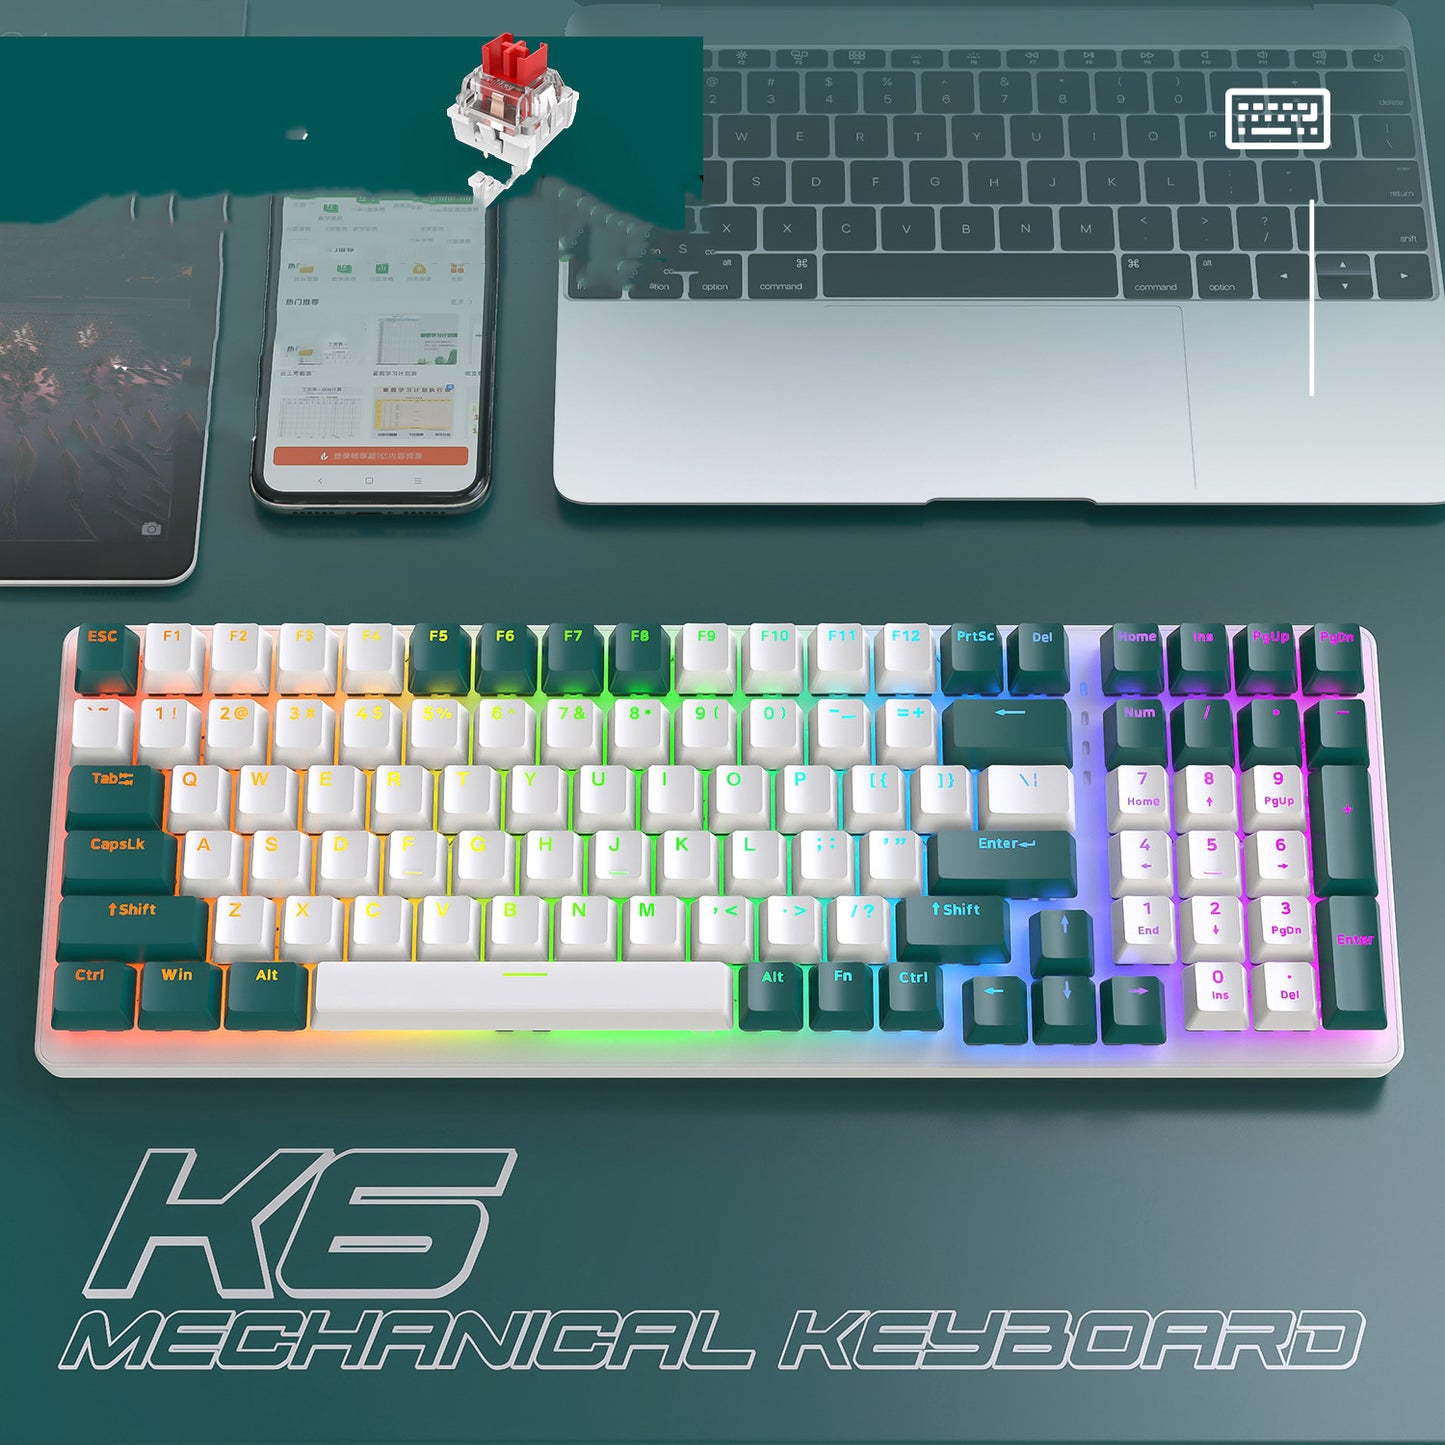 TriSync MechKey K6" - 3-Mode Mechanical Keyboard for Gaming and Productivity